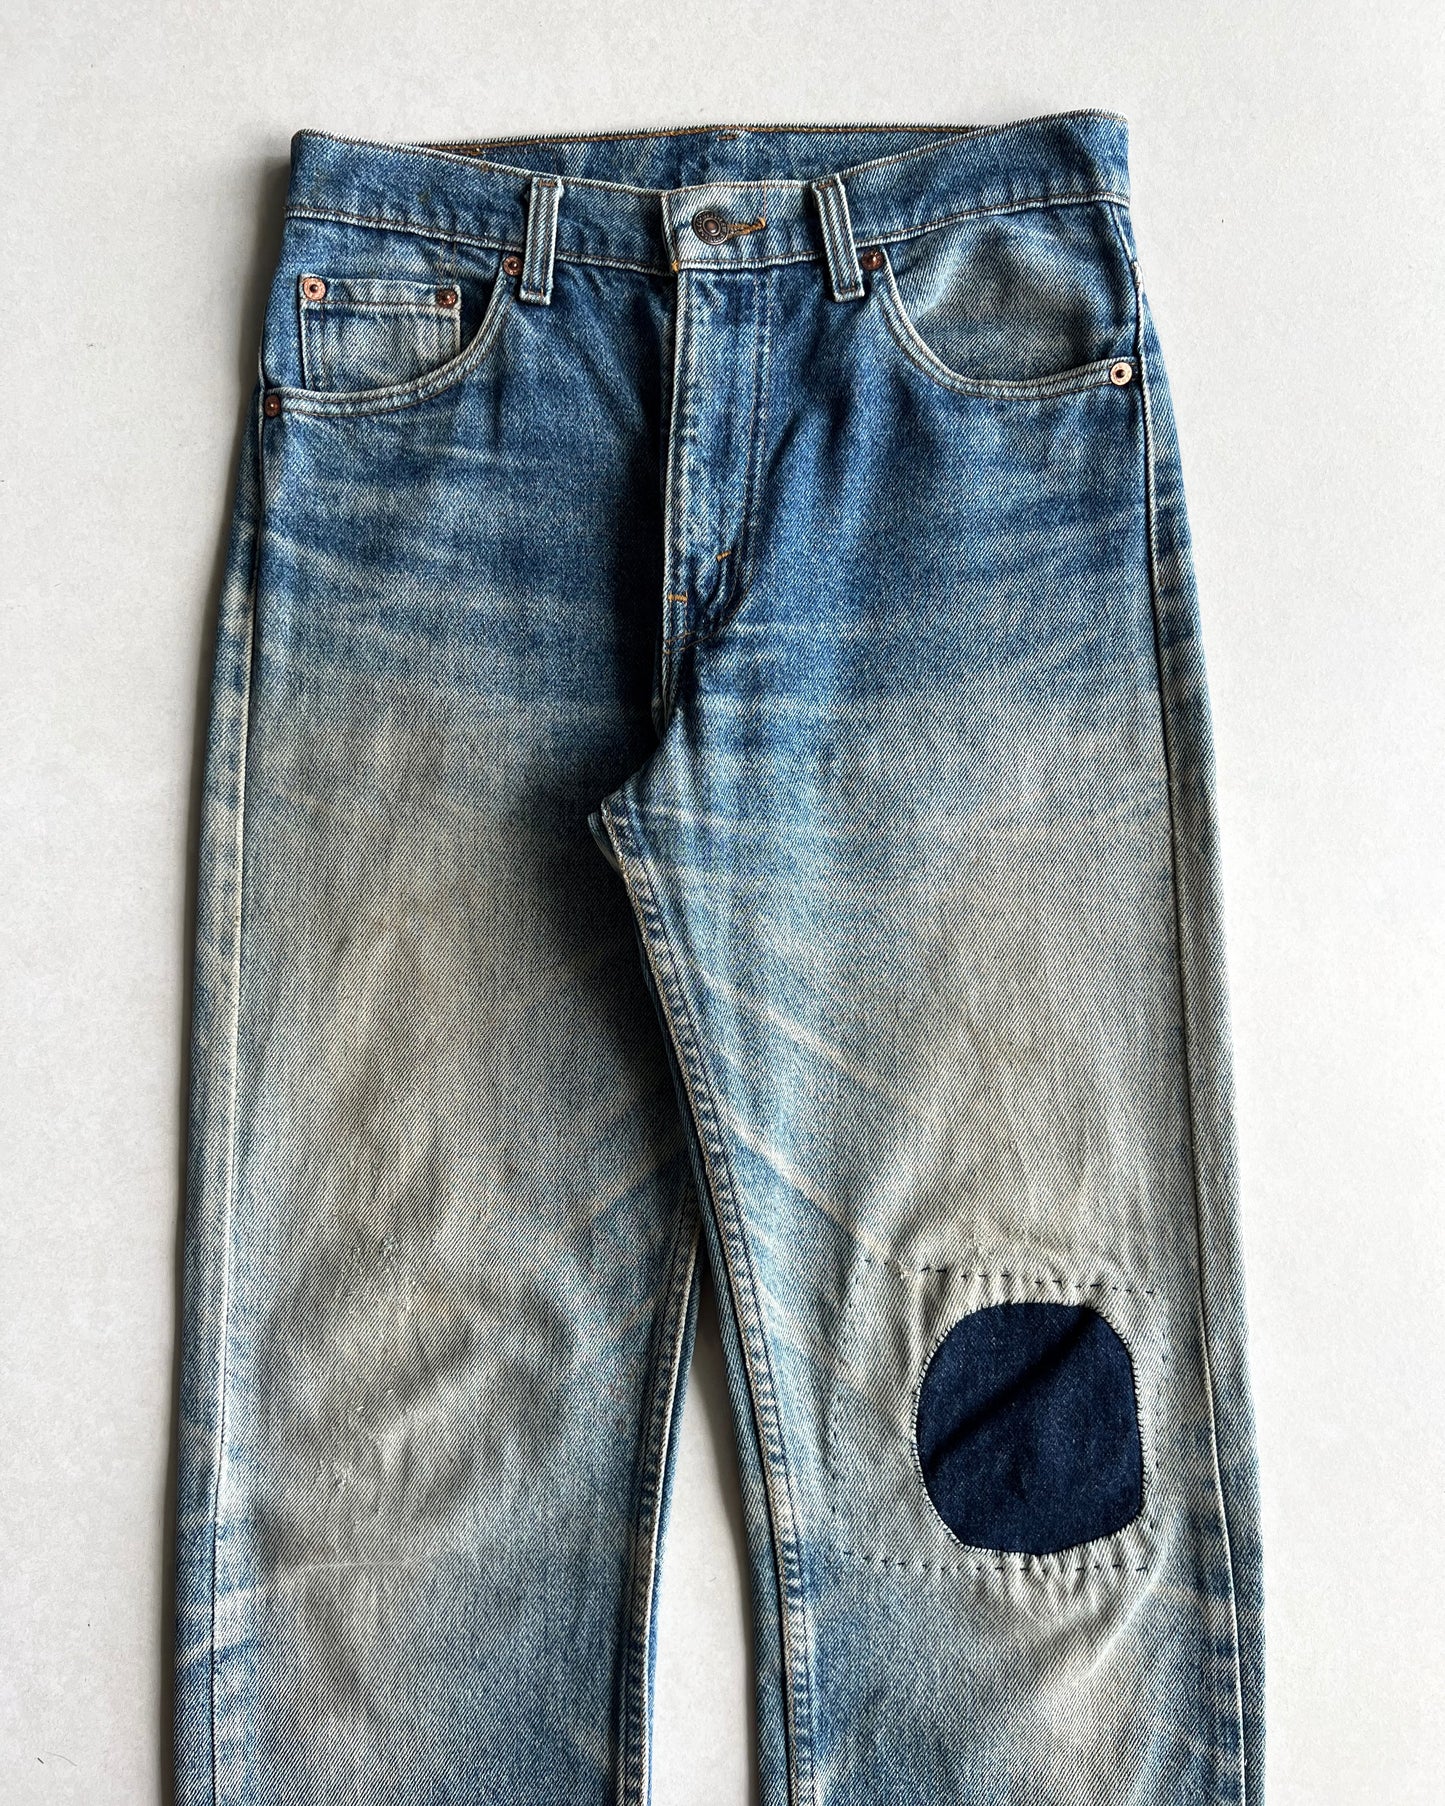 1990S FADED BLUE LEVI'S 505 REPAIRED JEANS (30X36)